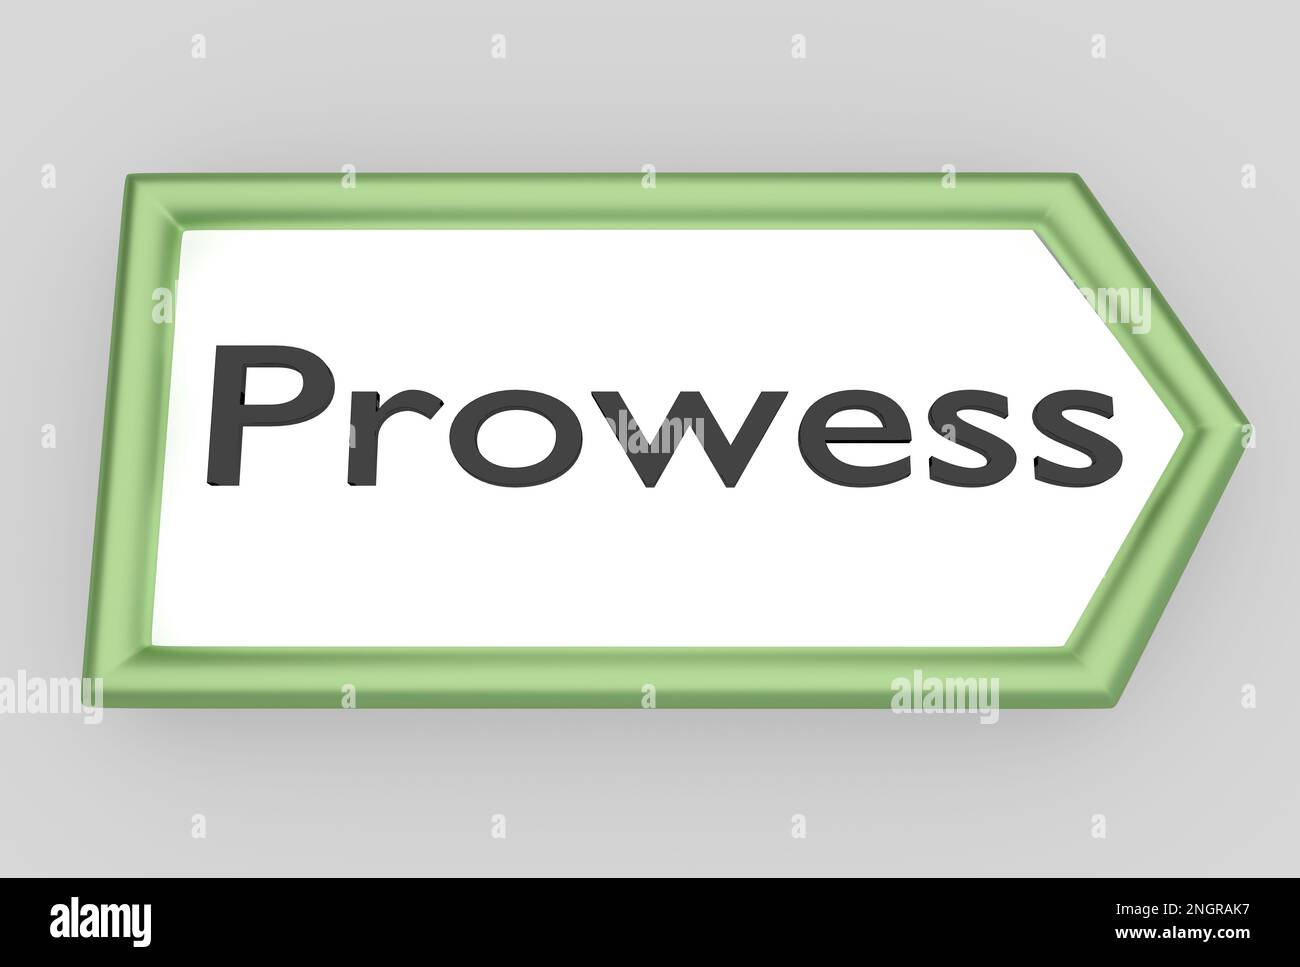 3D illustration of Prowess script on road sign, isolated on gray. Stock Photo